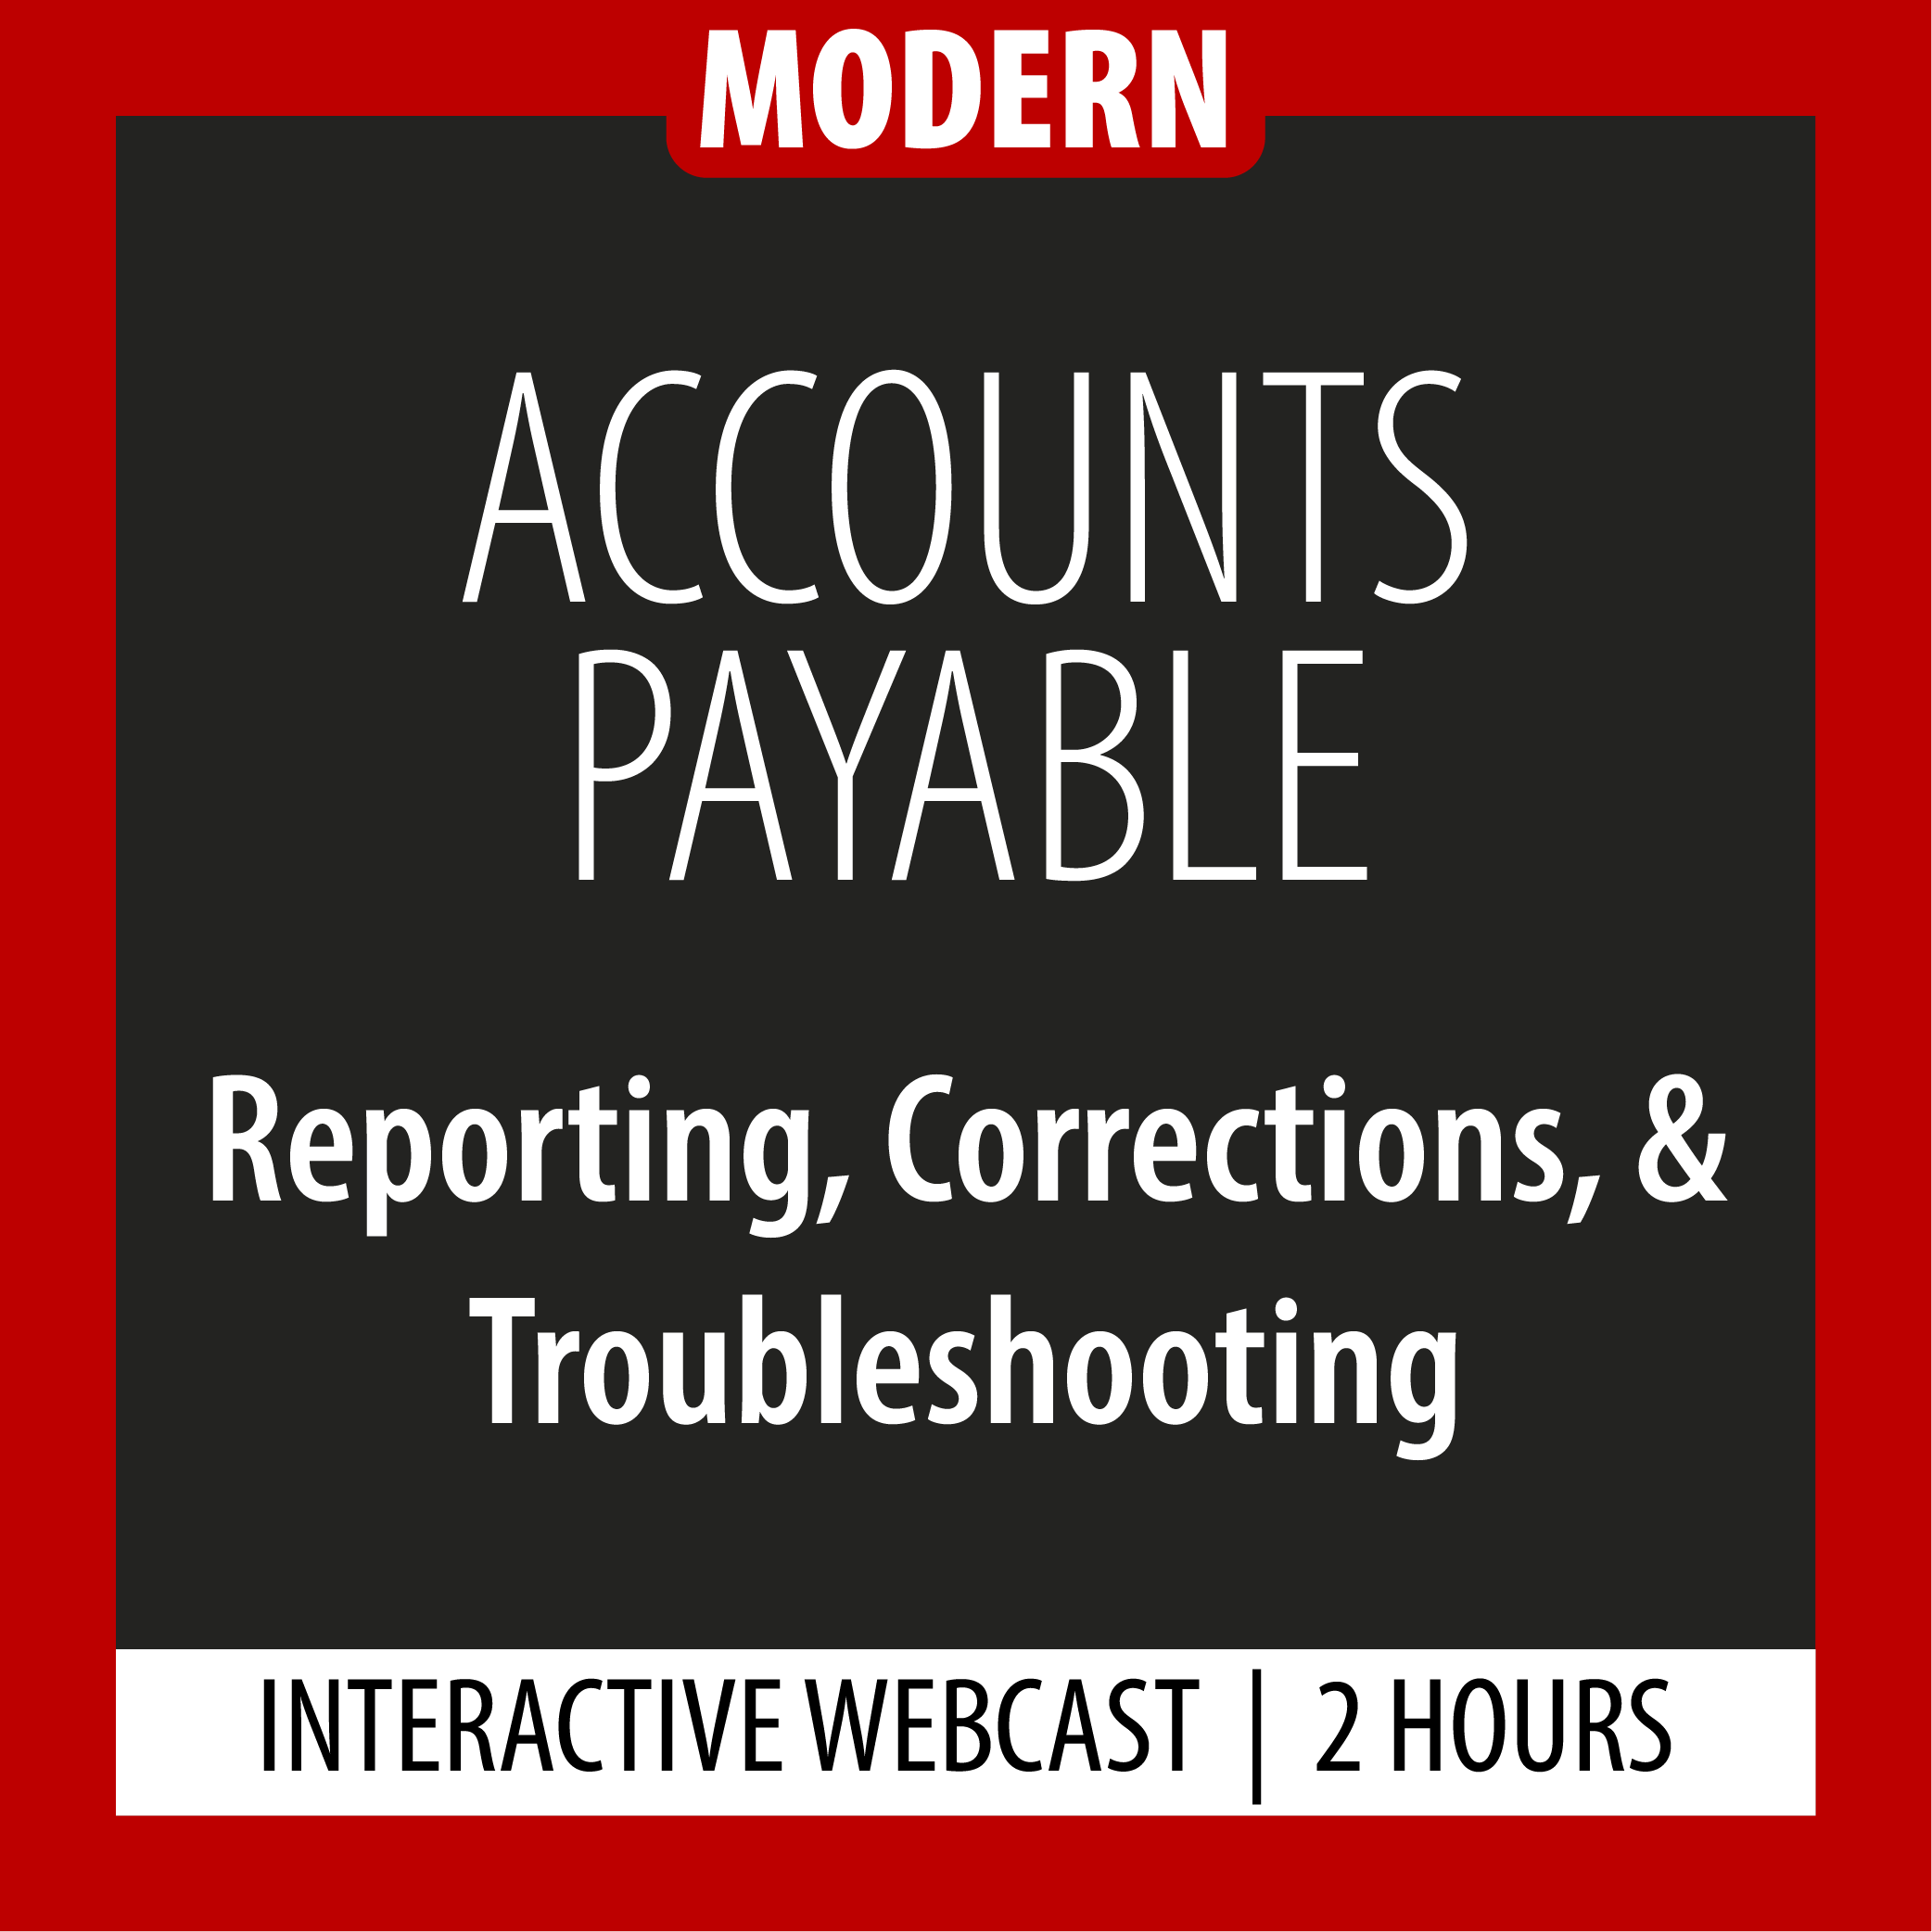 Modern - Accounts Payable - Reporting, Corrections, & Troubleshooting - Webcast - 2 Hours